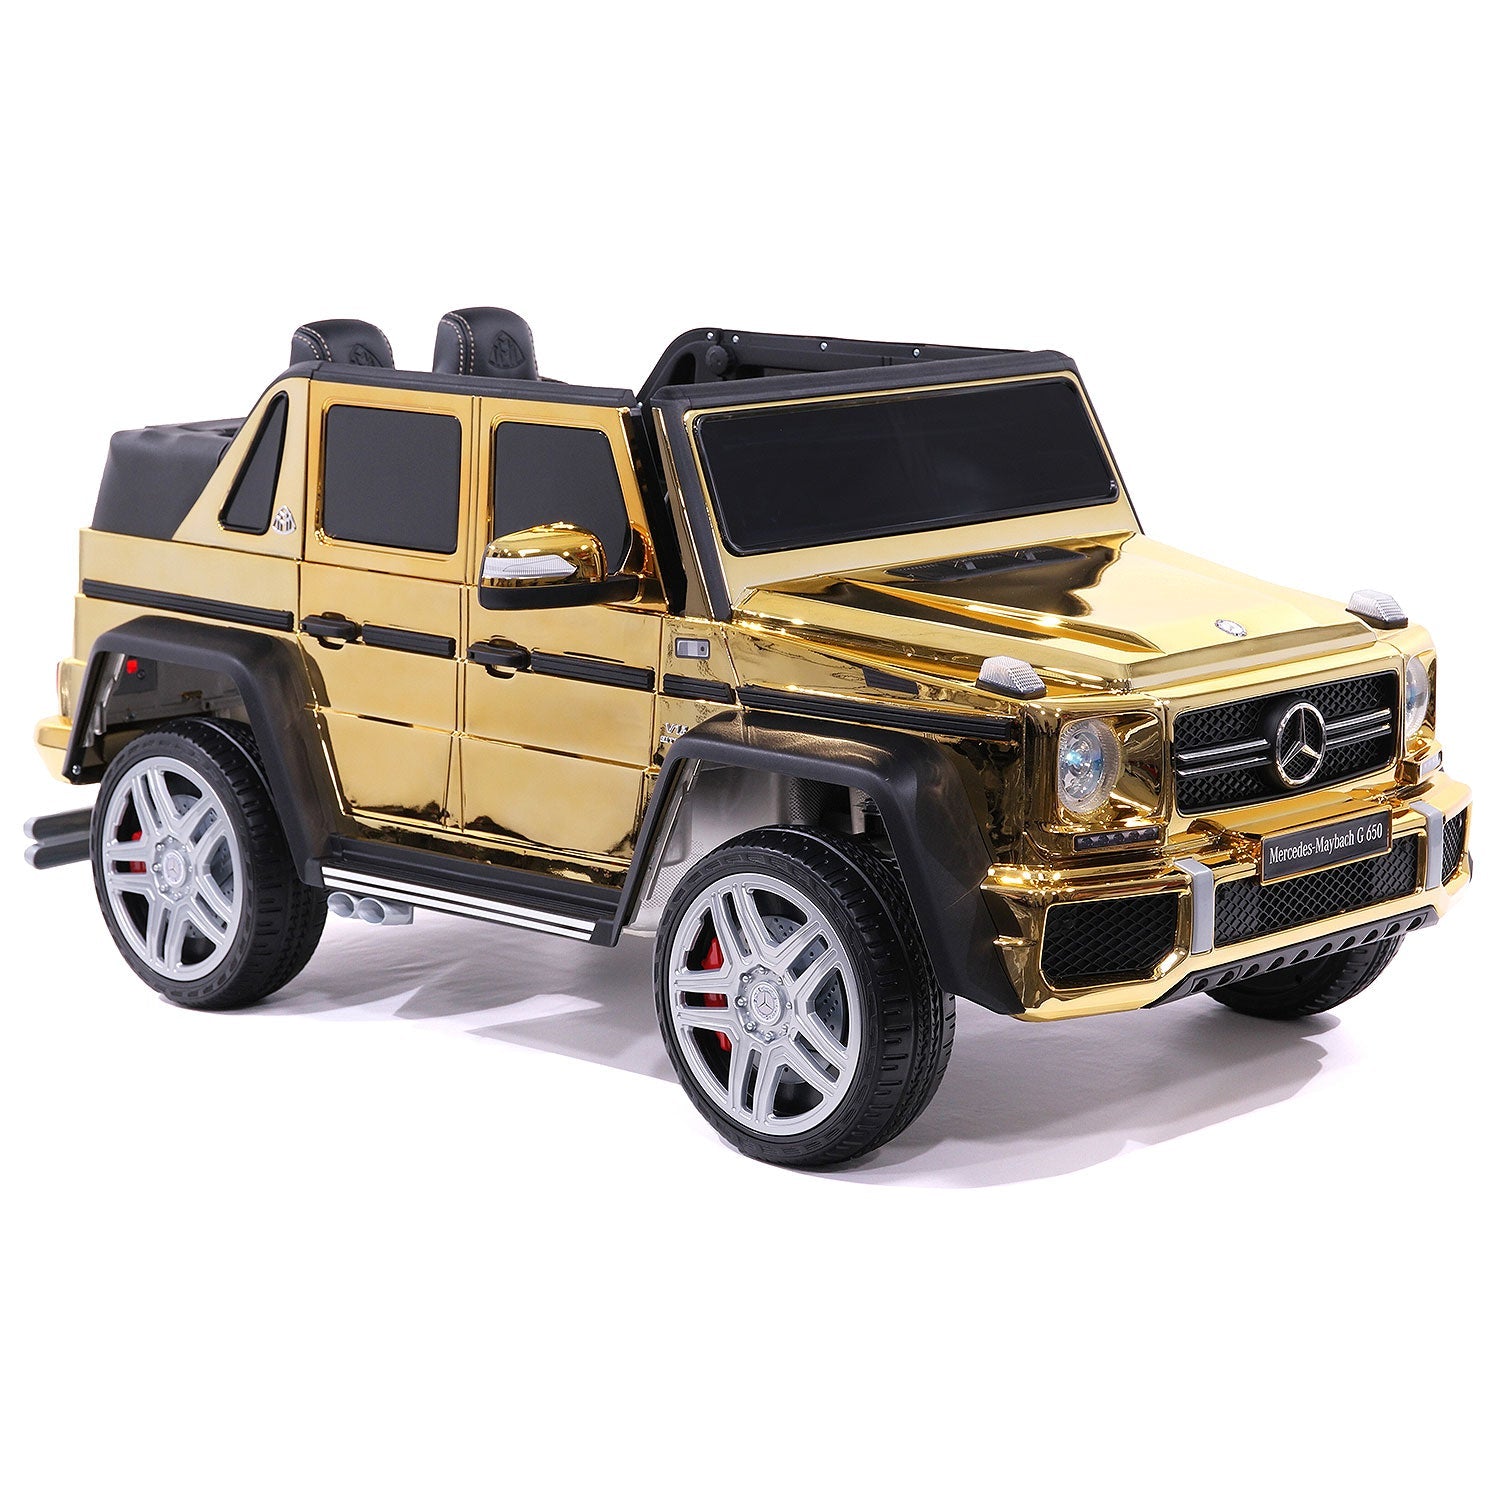 Mercedes Maybach G650 12v Kids Ride-on Car With Parental Remote | Gold